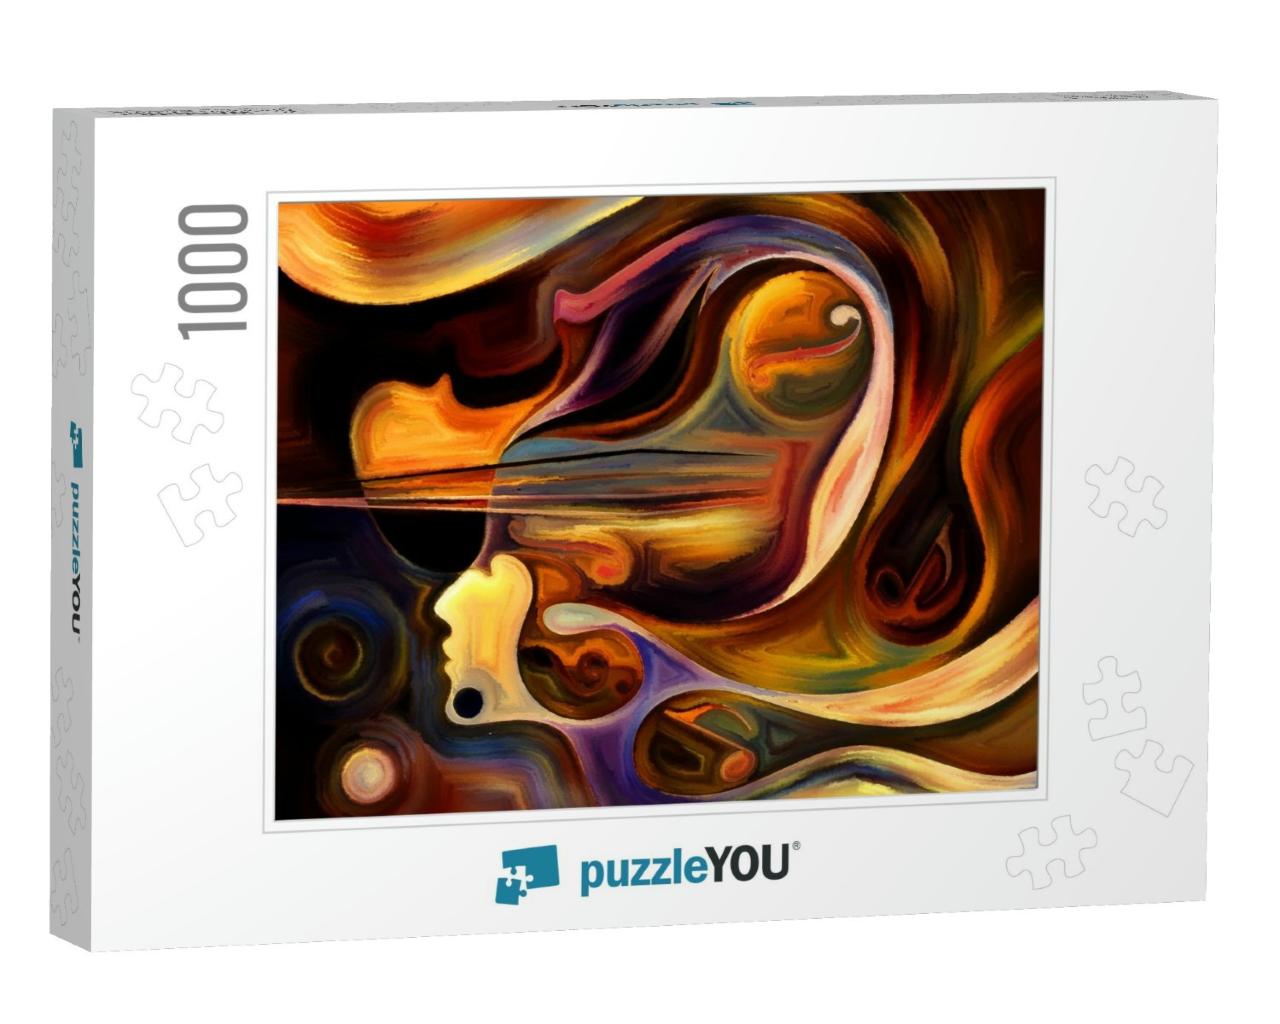 Inner Melody Series. Abstract Design Made of Colorful Hum... Jigsaw Puzzle with 1000 pieces